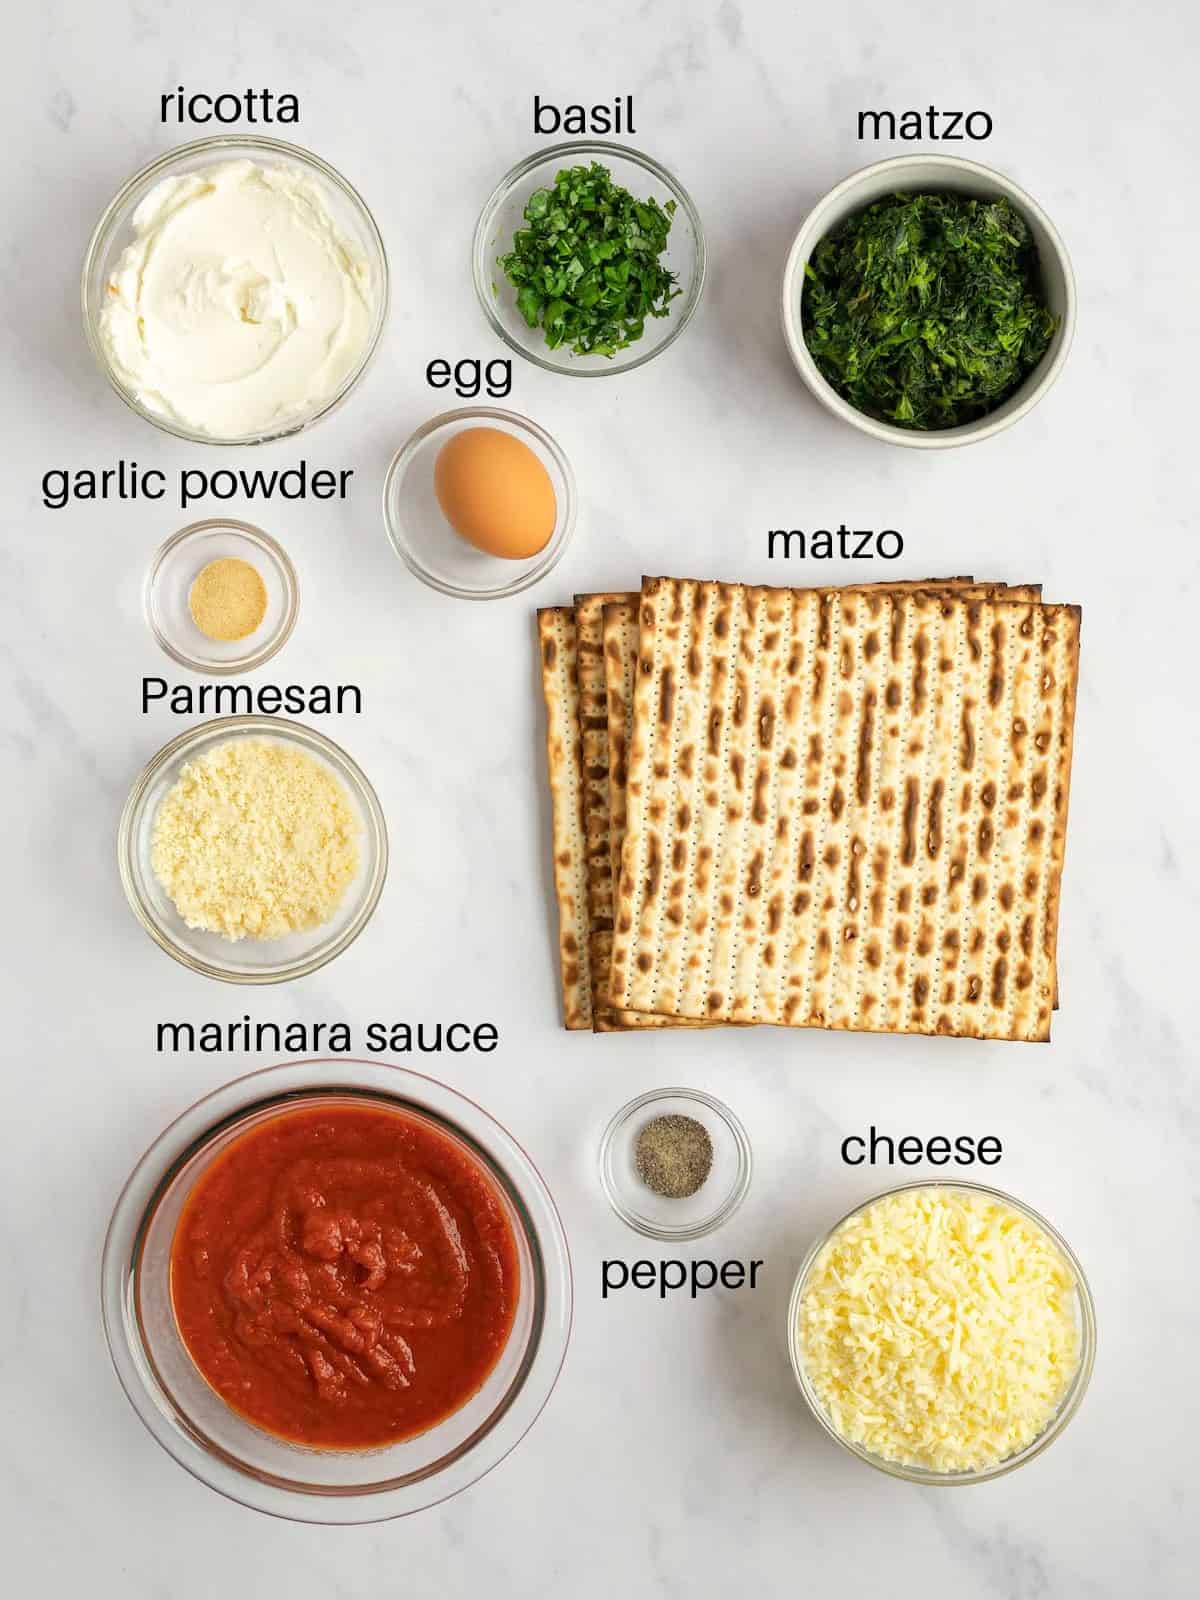 Ingredients needed to make matzo lasagna for passover.